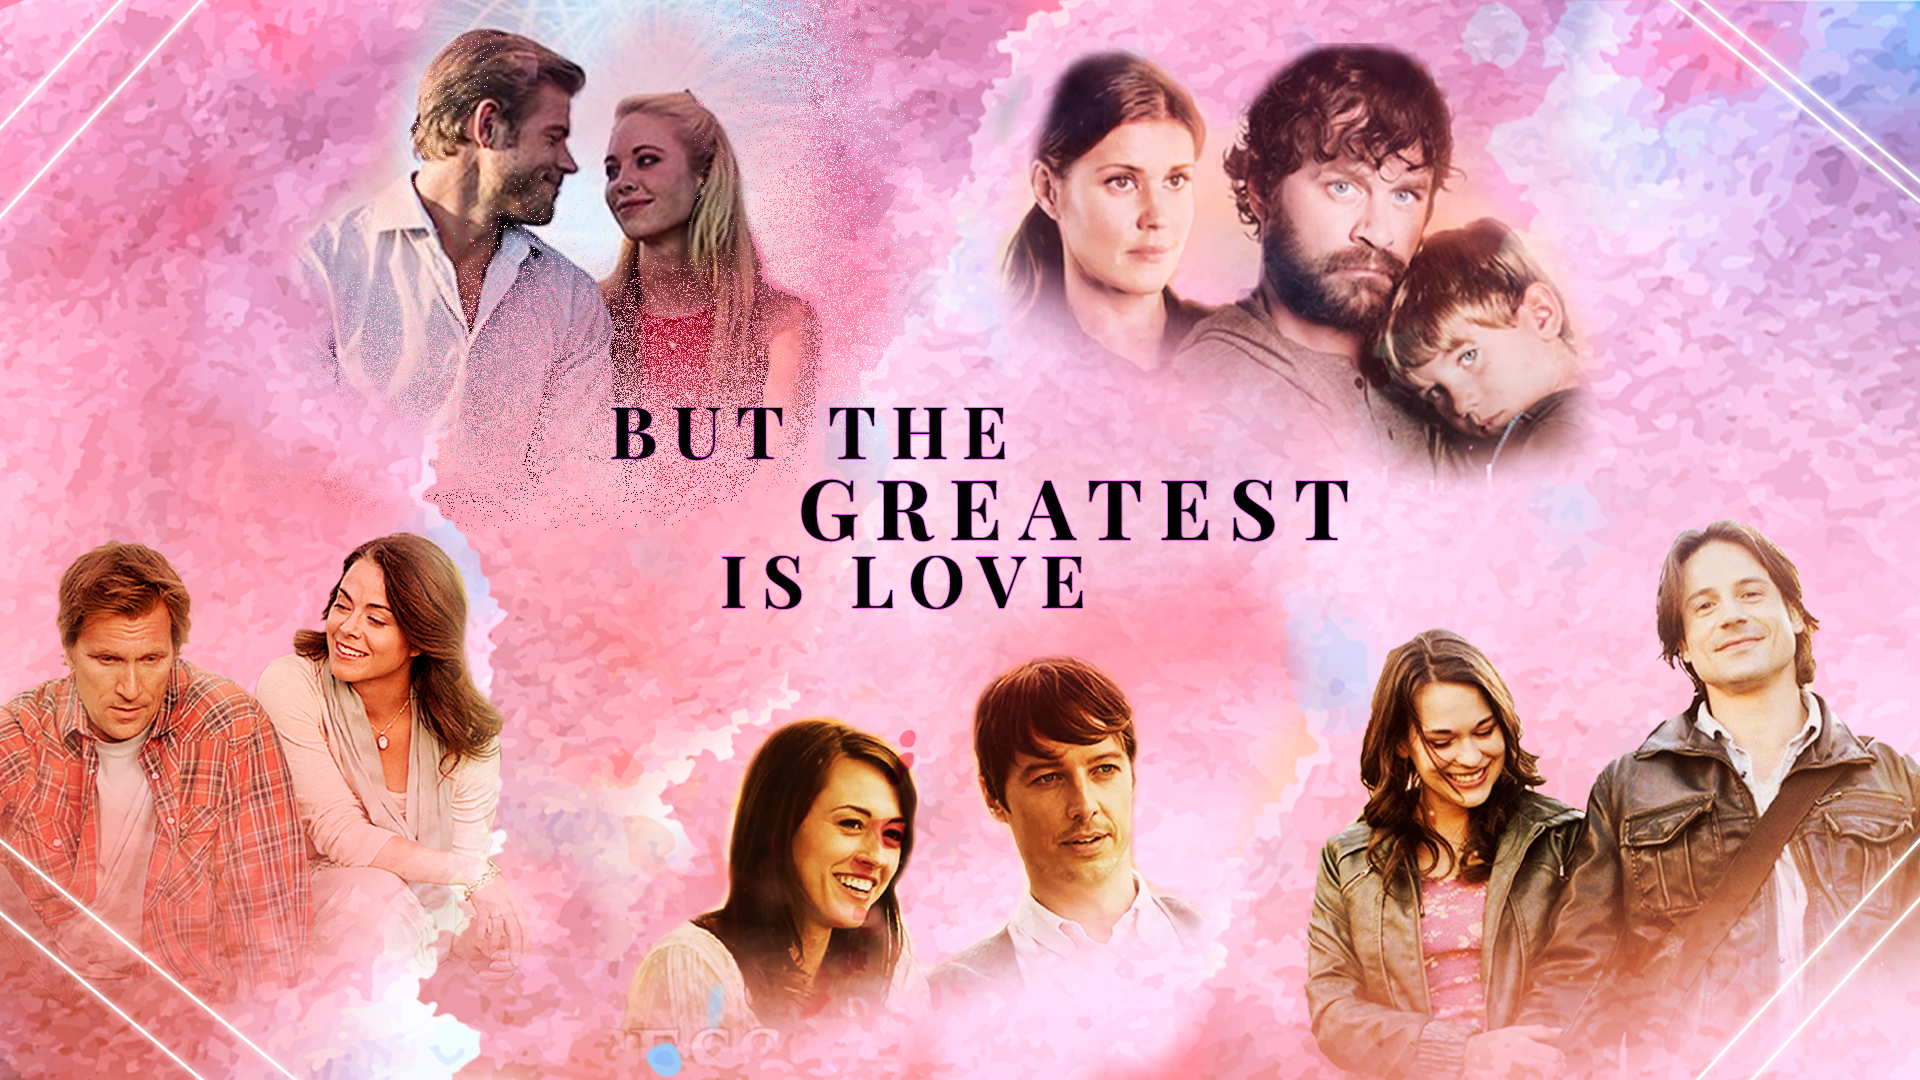 Banner Christian Romance theme: But the greatest is Love